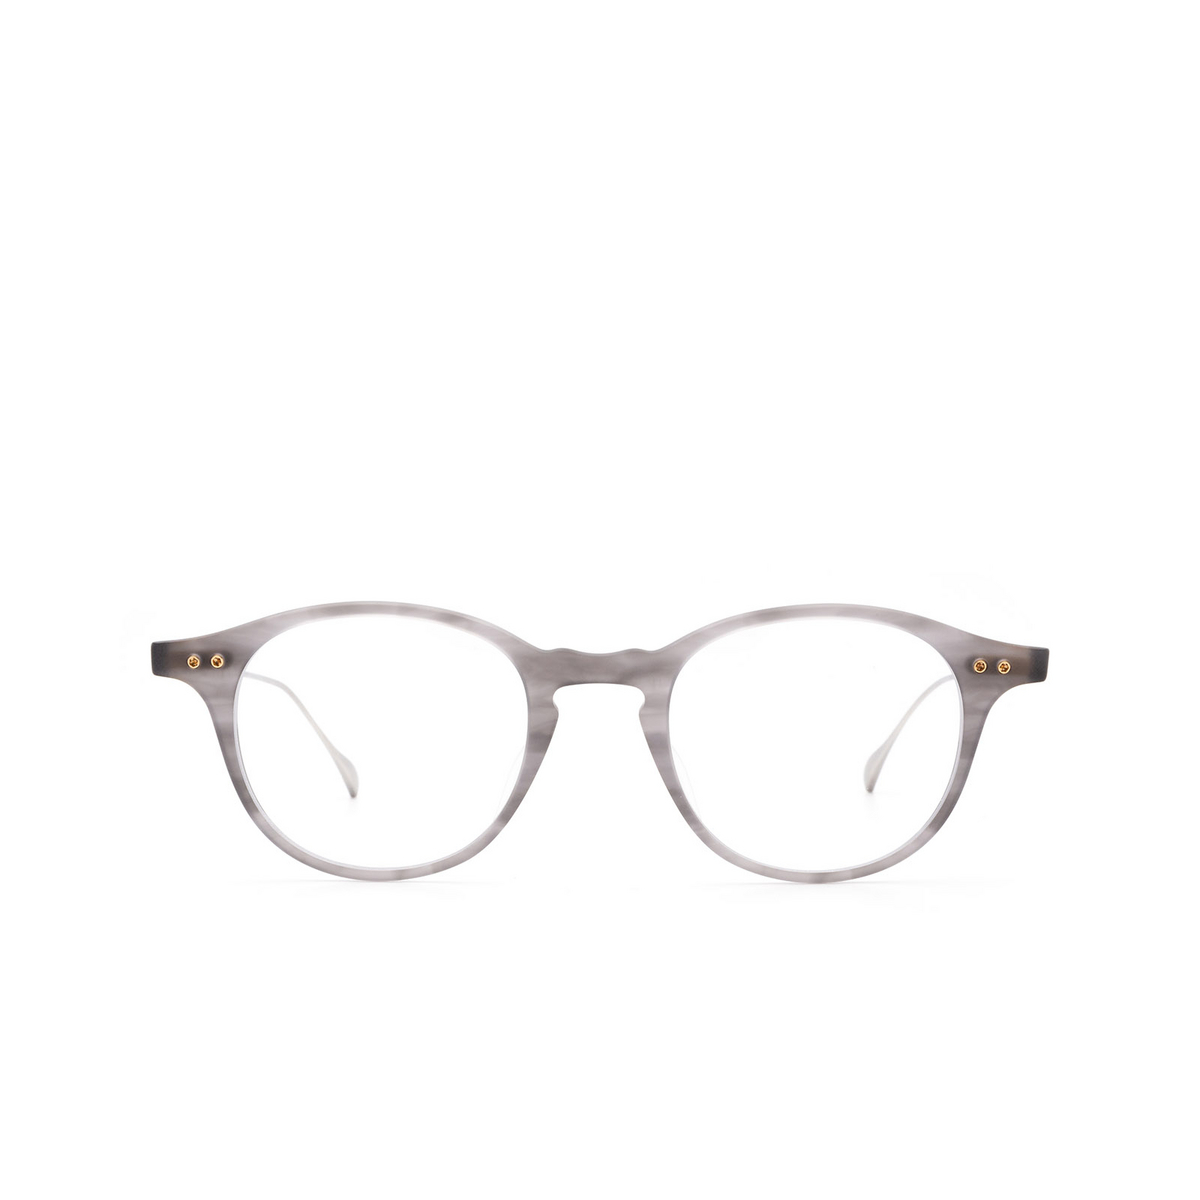 Dita® Round Eyeglasses: DRX2073 color C-gry-slv - front view.